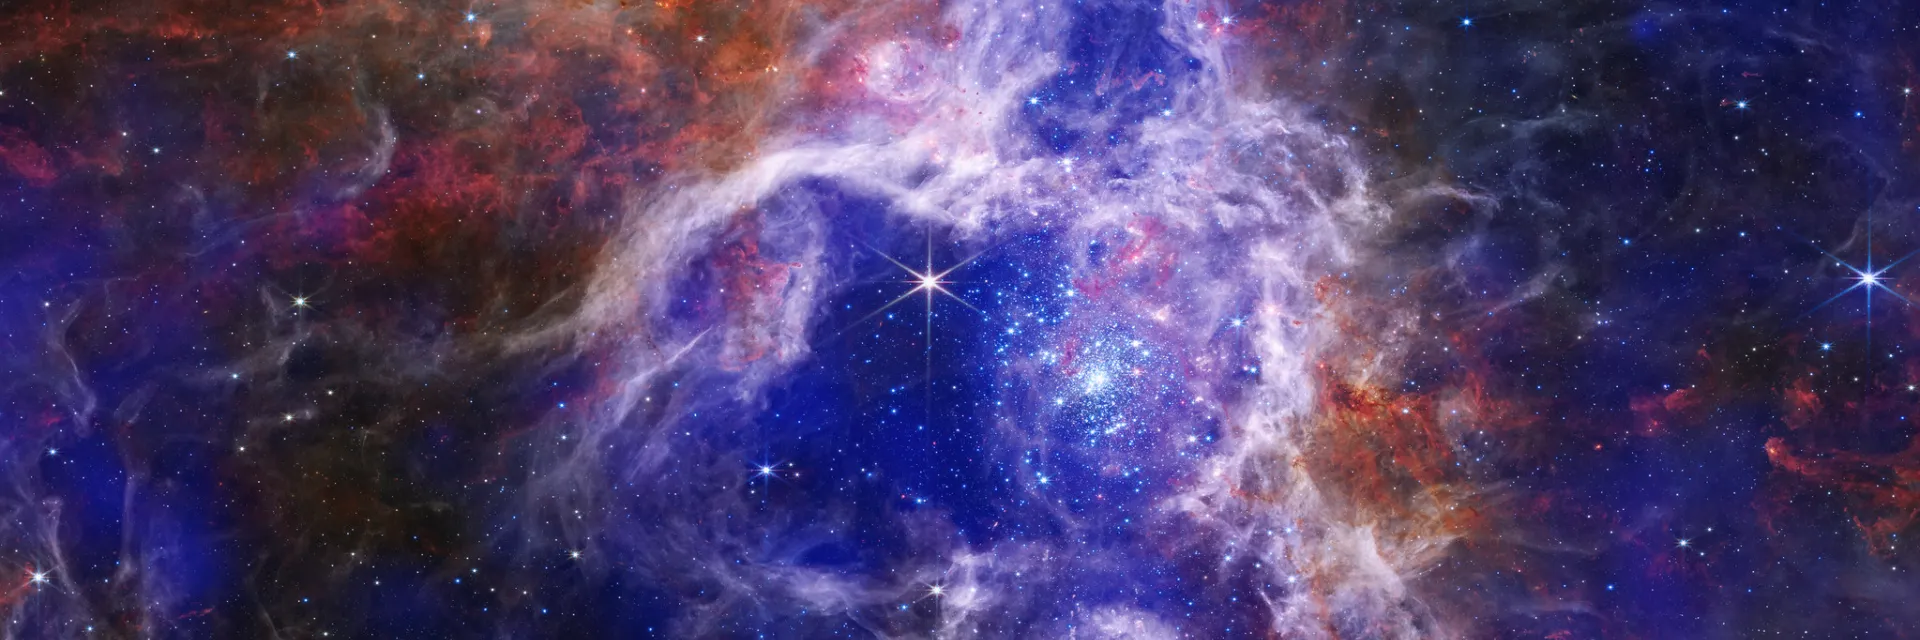 Chandra X-ray Observatory teamed up with the Webb telescope to create a new stunning composite image of the Tarantula Nebula. Chandra's X-rays (shown in royal blue and purple) identify extremely hot gas and supernova explosion remnants, while Webb reveals forming baby stars. Image credit: X-ray: NASA/CXC/Penn State Univ./L. Townsley et al.; IR: NASA/ESA/CSA/STScI/JWST ERO Production Team